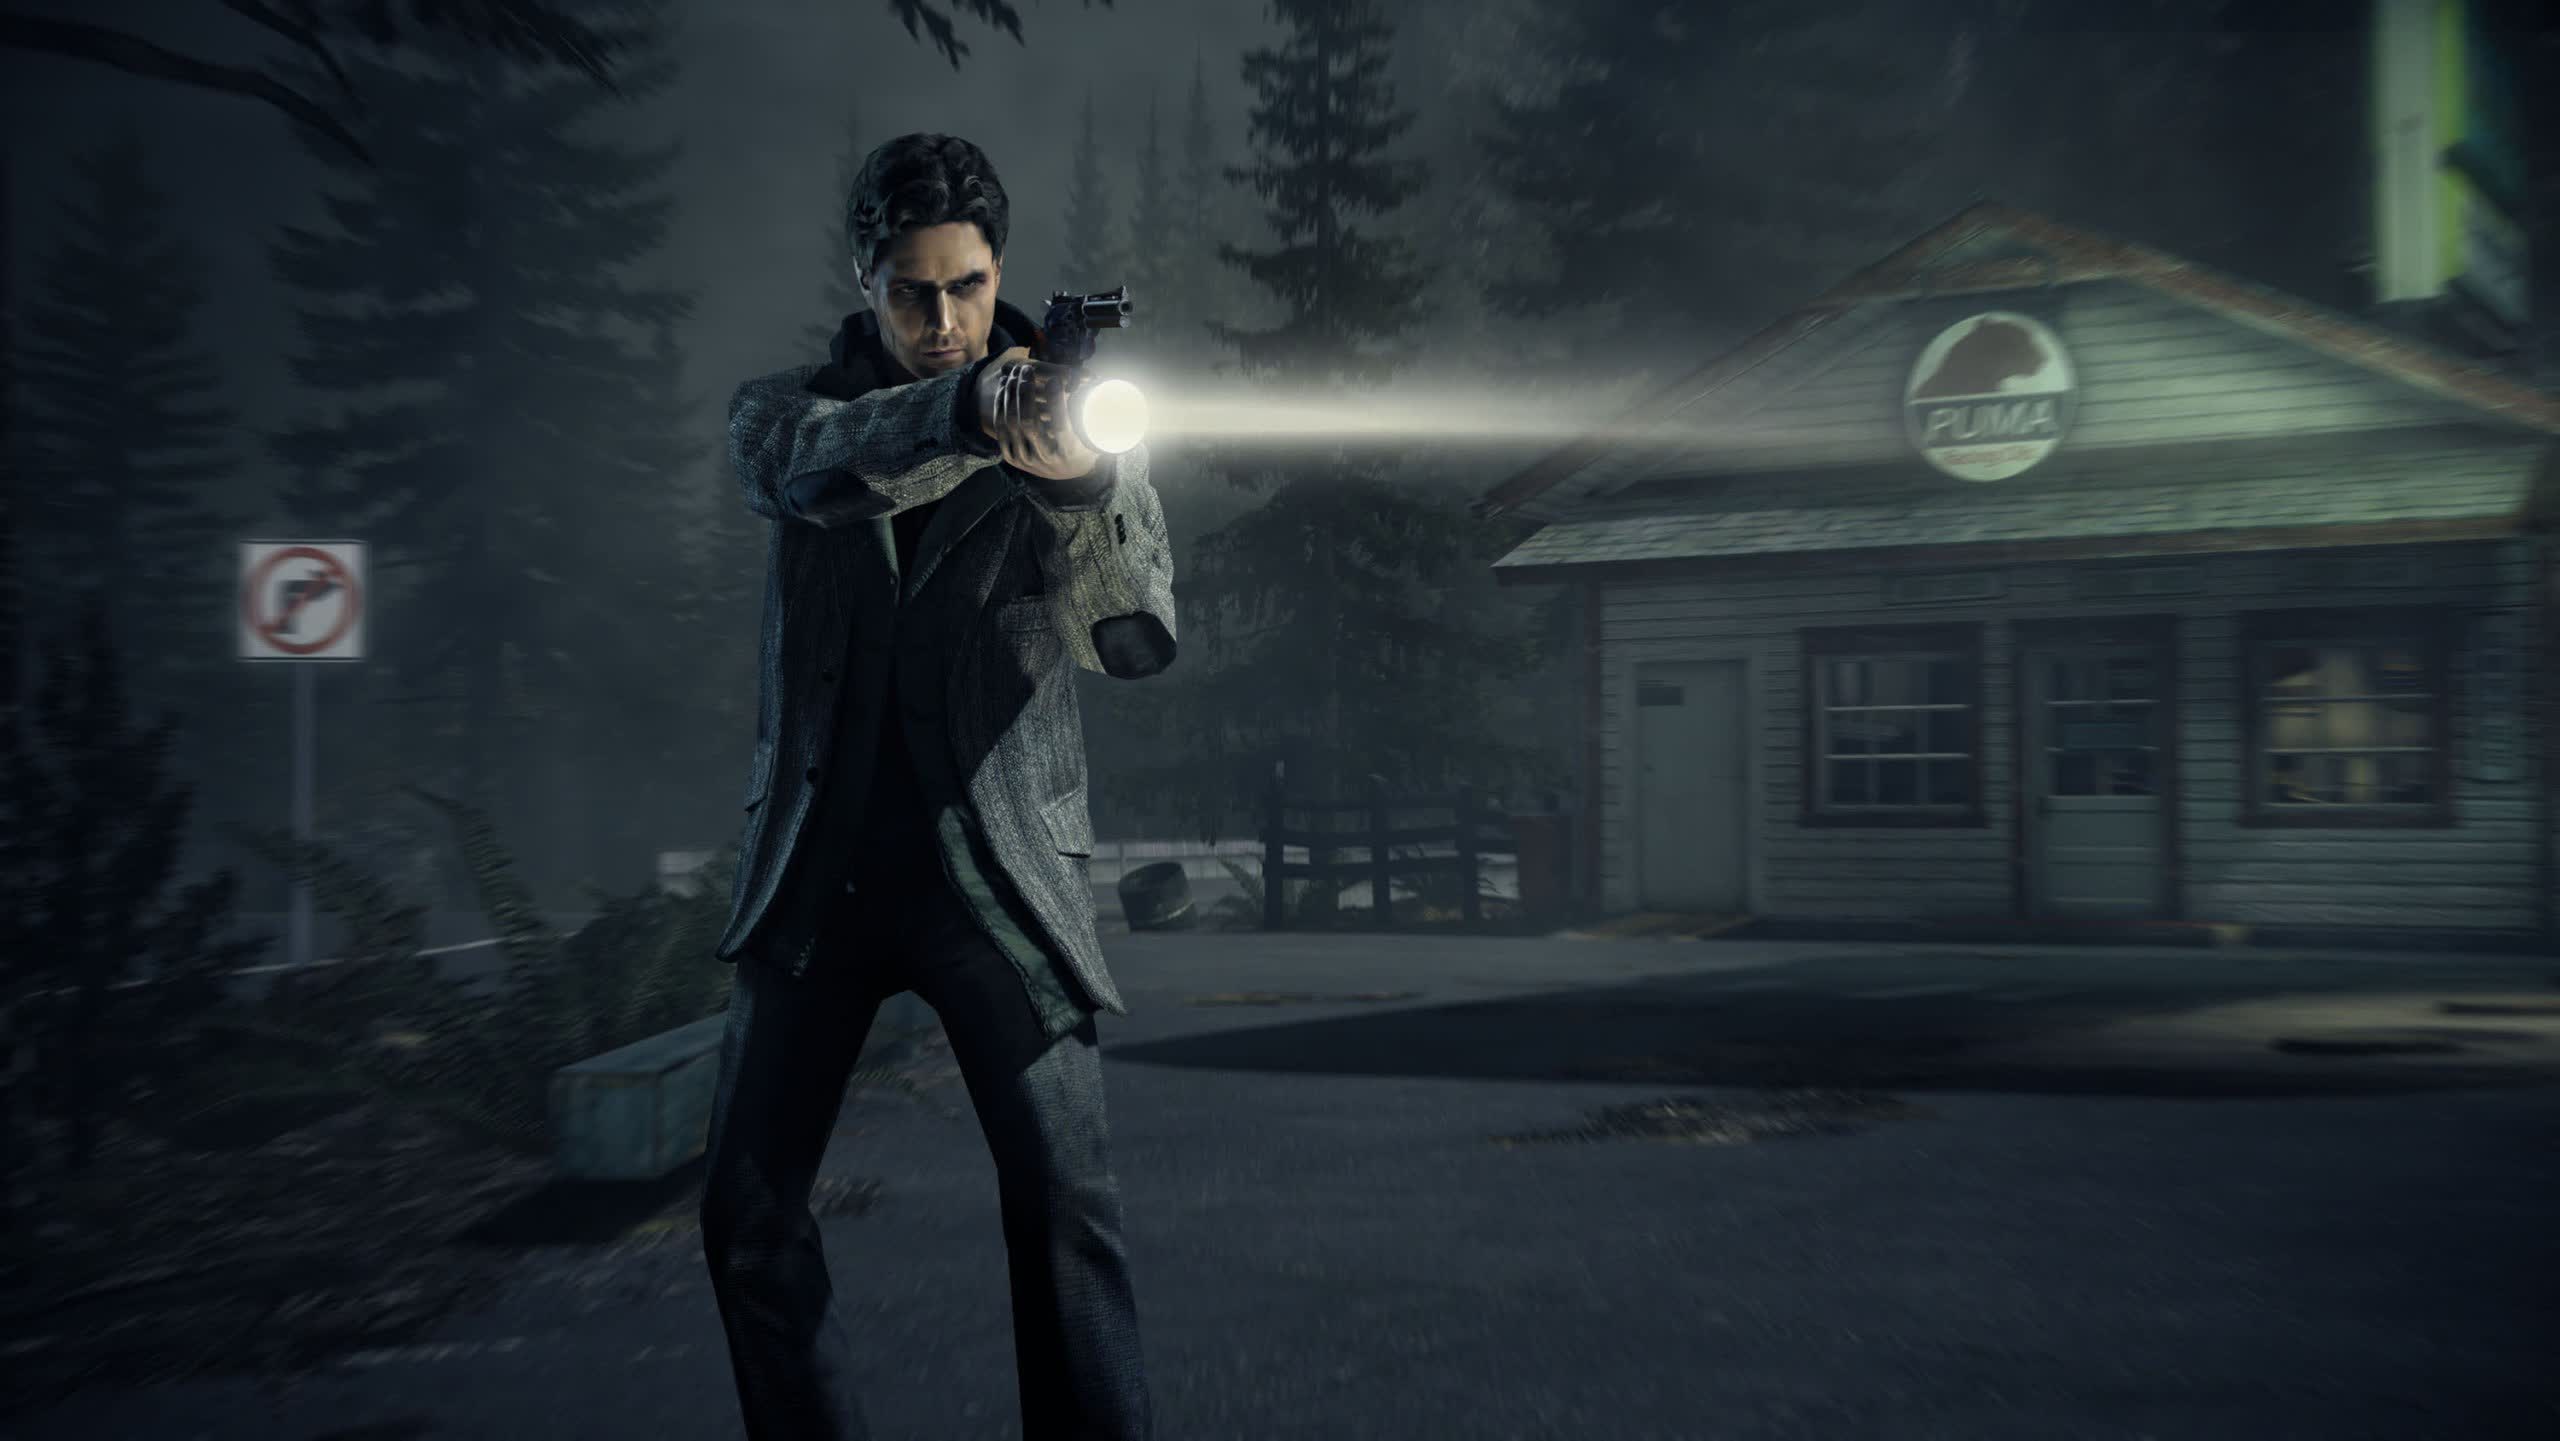 Remedy releases investor update on five projects it has in production